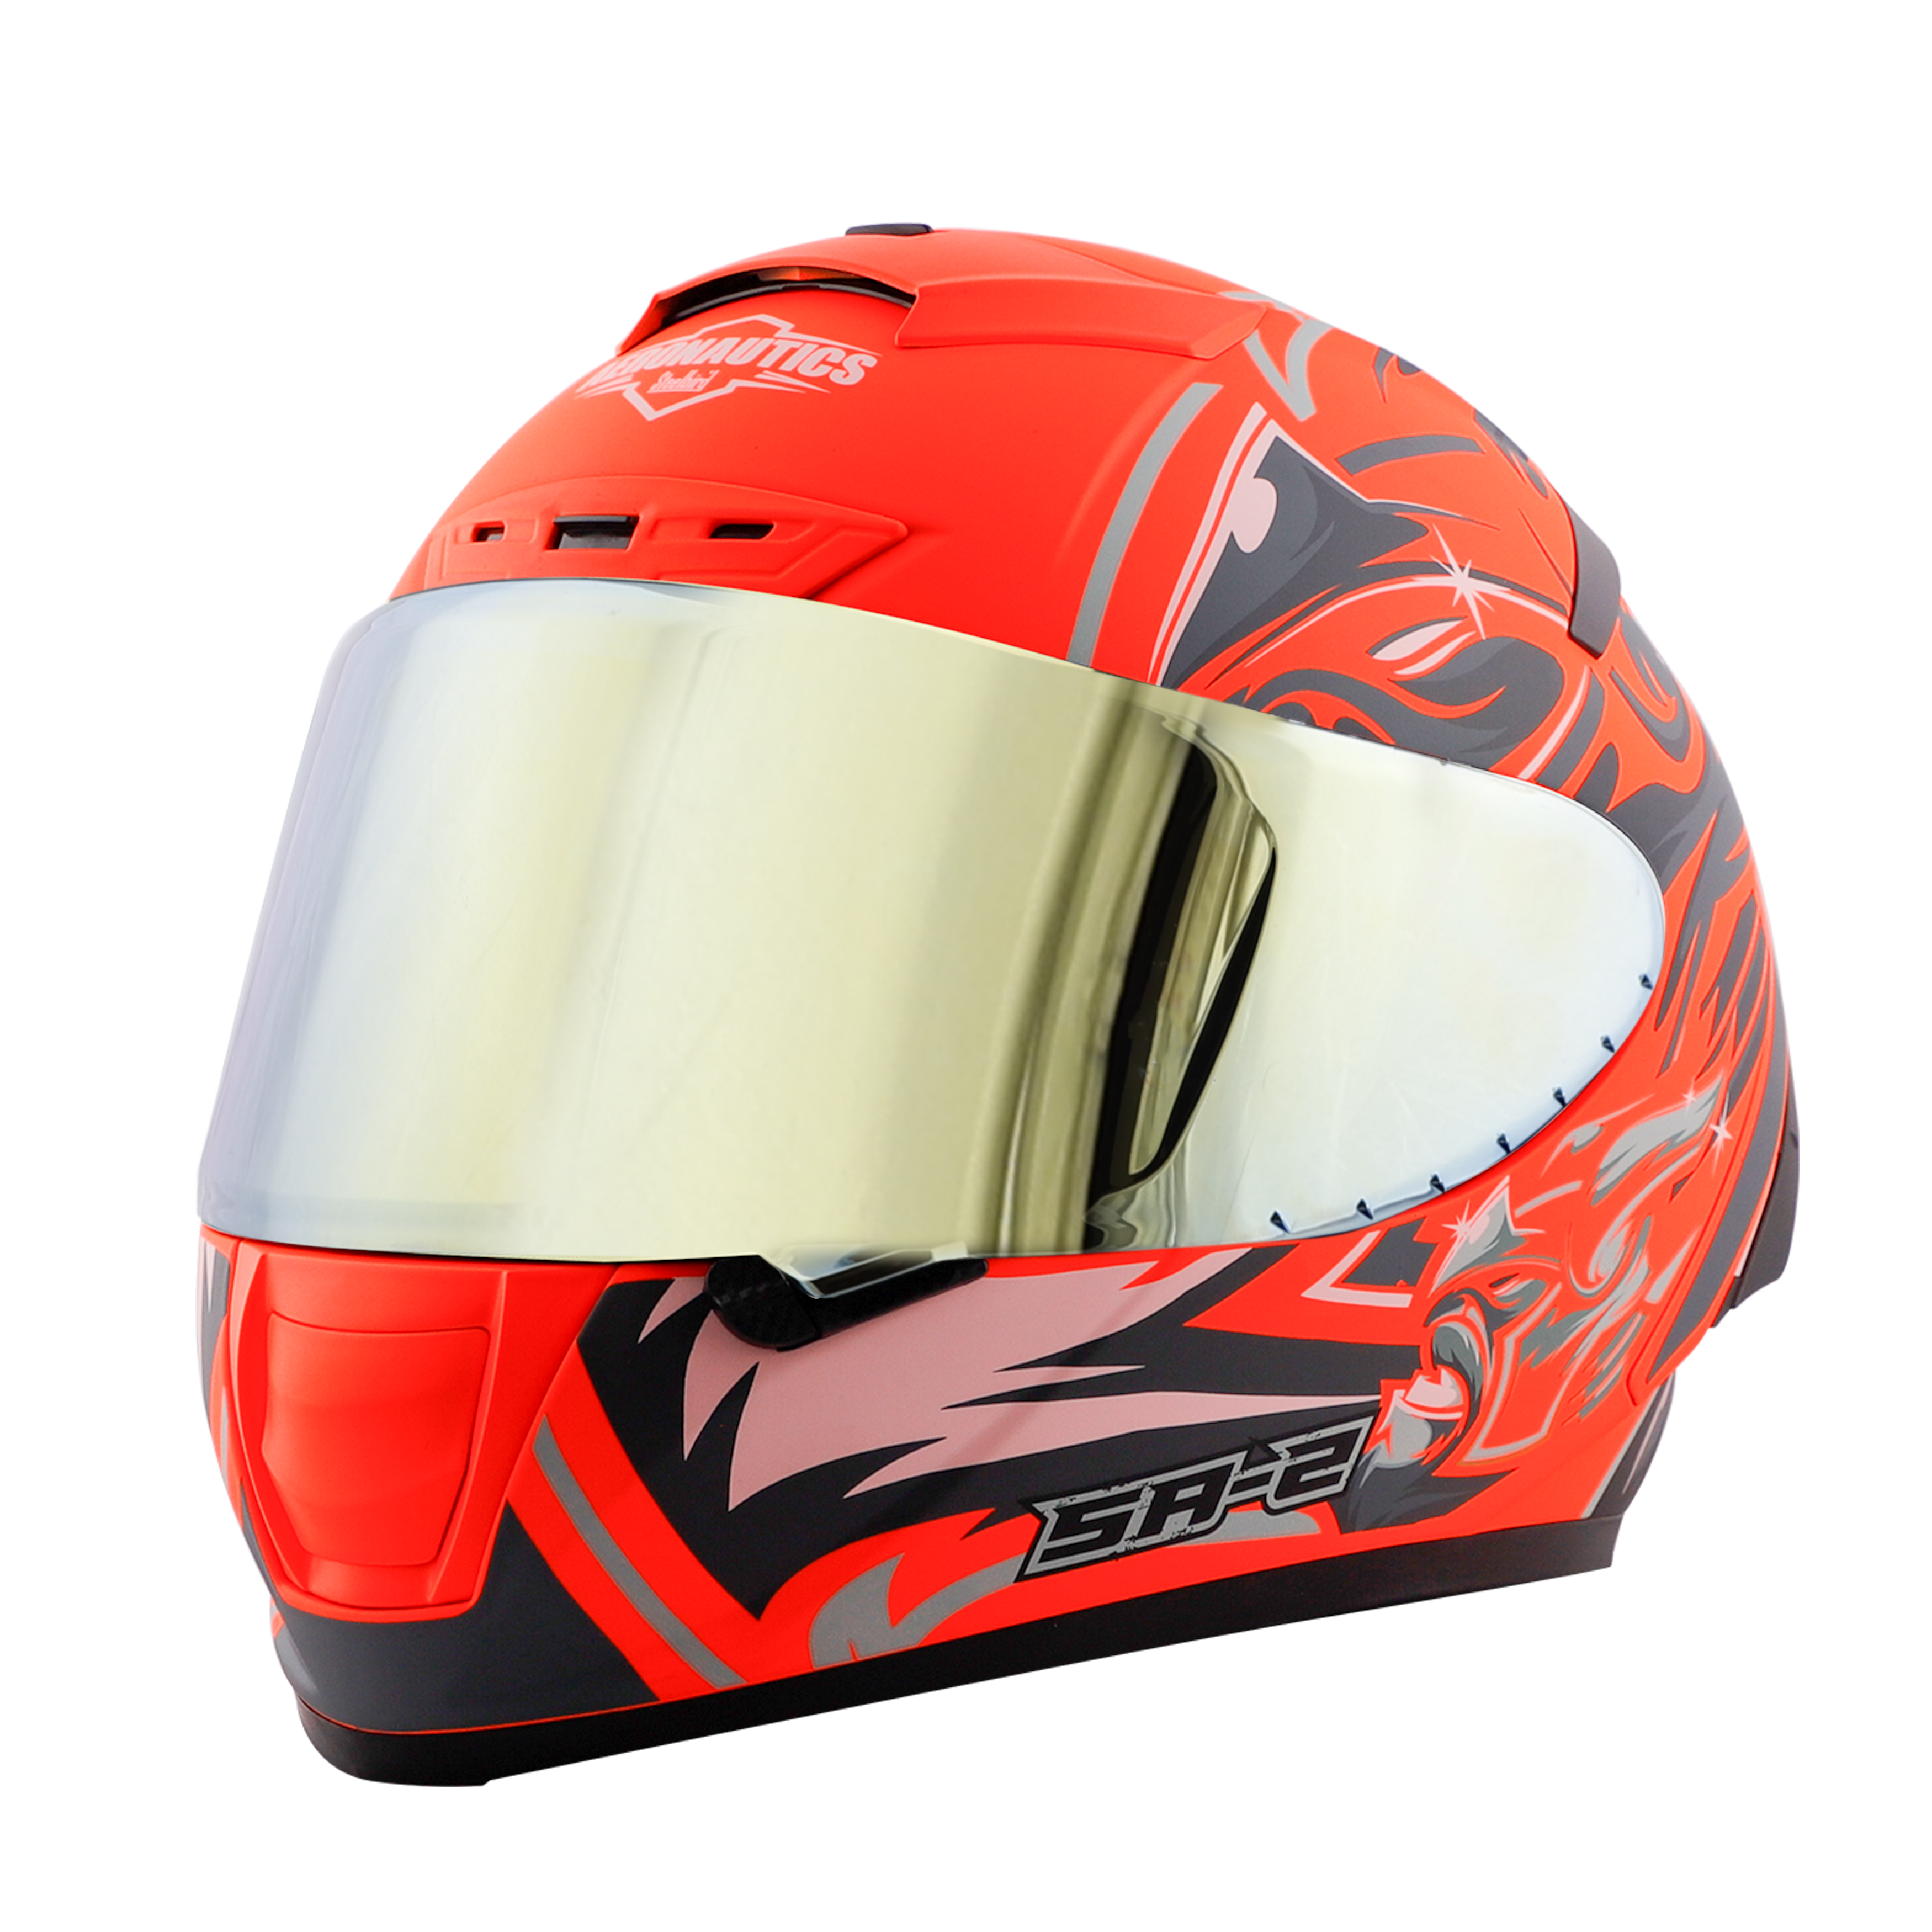 SA-2 VILLAIN GLOSSY FLUO ORANGE WITH GREY (FITTED WITH CLEAR VISOR EXTRA GOLD CHROME VISOR FREE)